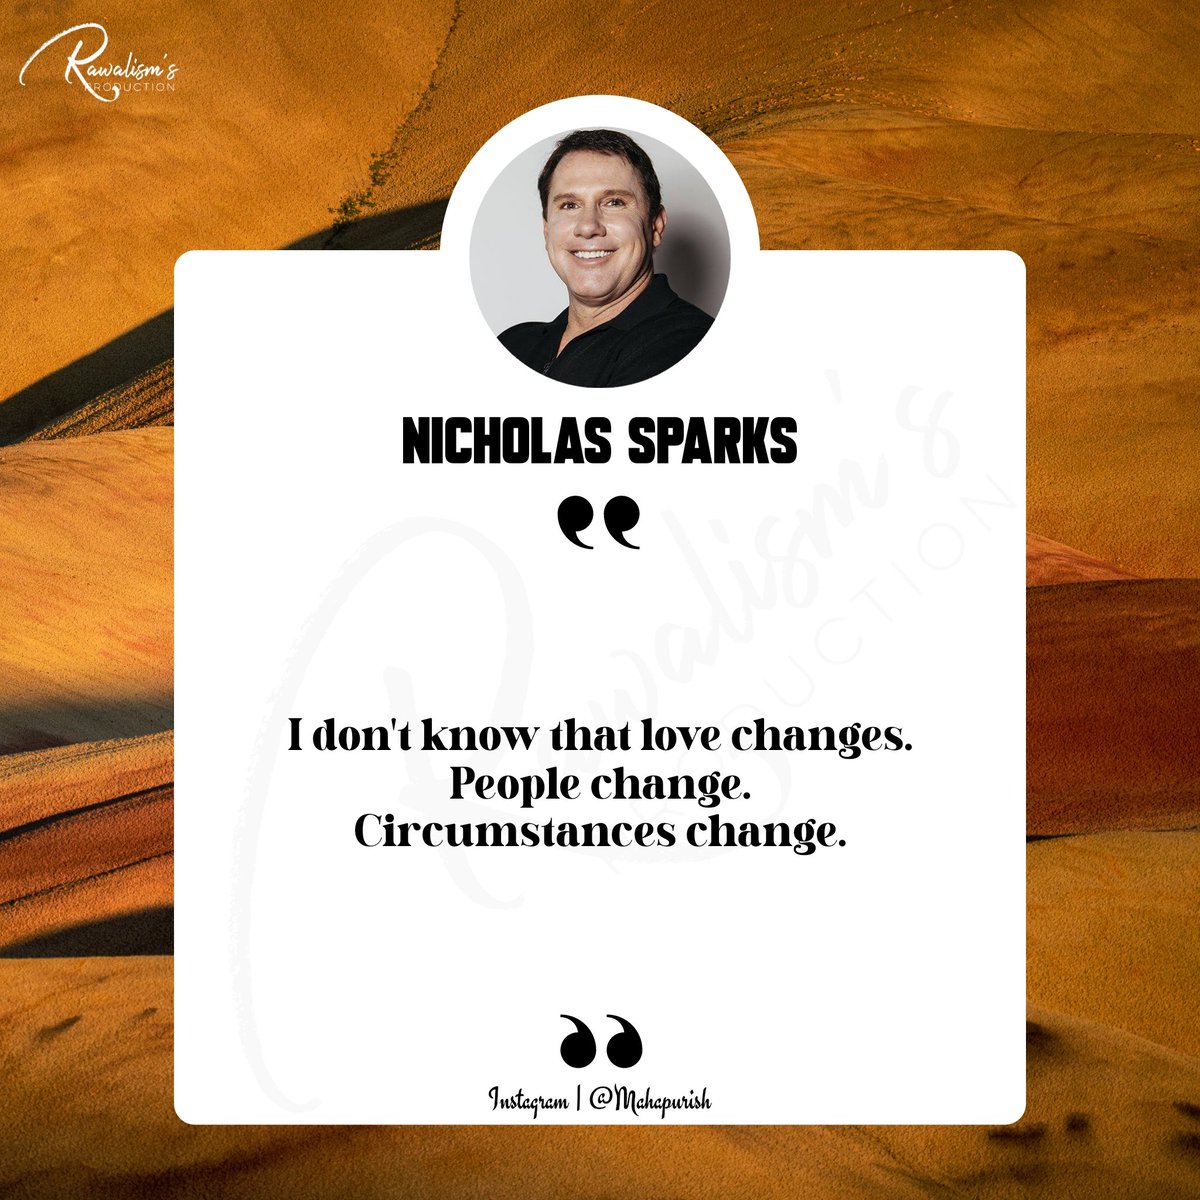 Quotes By Officials
-
Said by: Nicholas Sparks
-
#quotes #love #motivation #nicholassparks #quoteoftheday #instagramquotes #inspiration #motivationalquotes #quoteoftheday #quote #people #inspirationalquotes #nicholassparksquotes #success #mahapurish #positivevibes #lovequotes